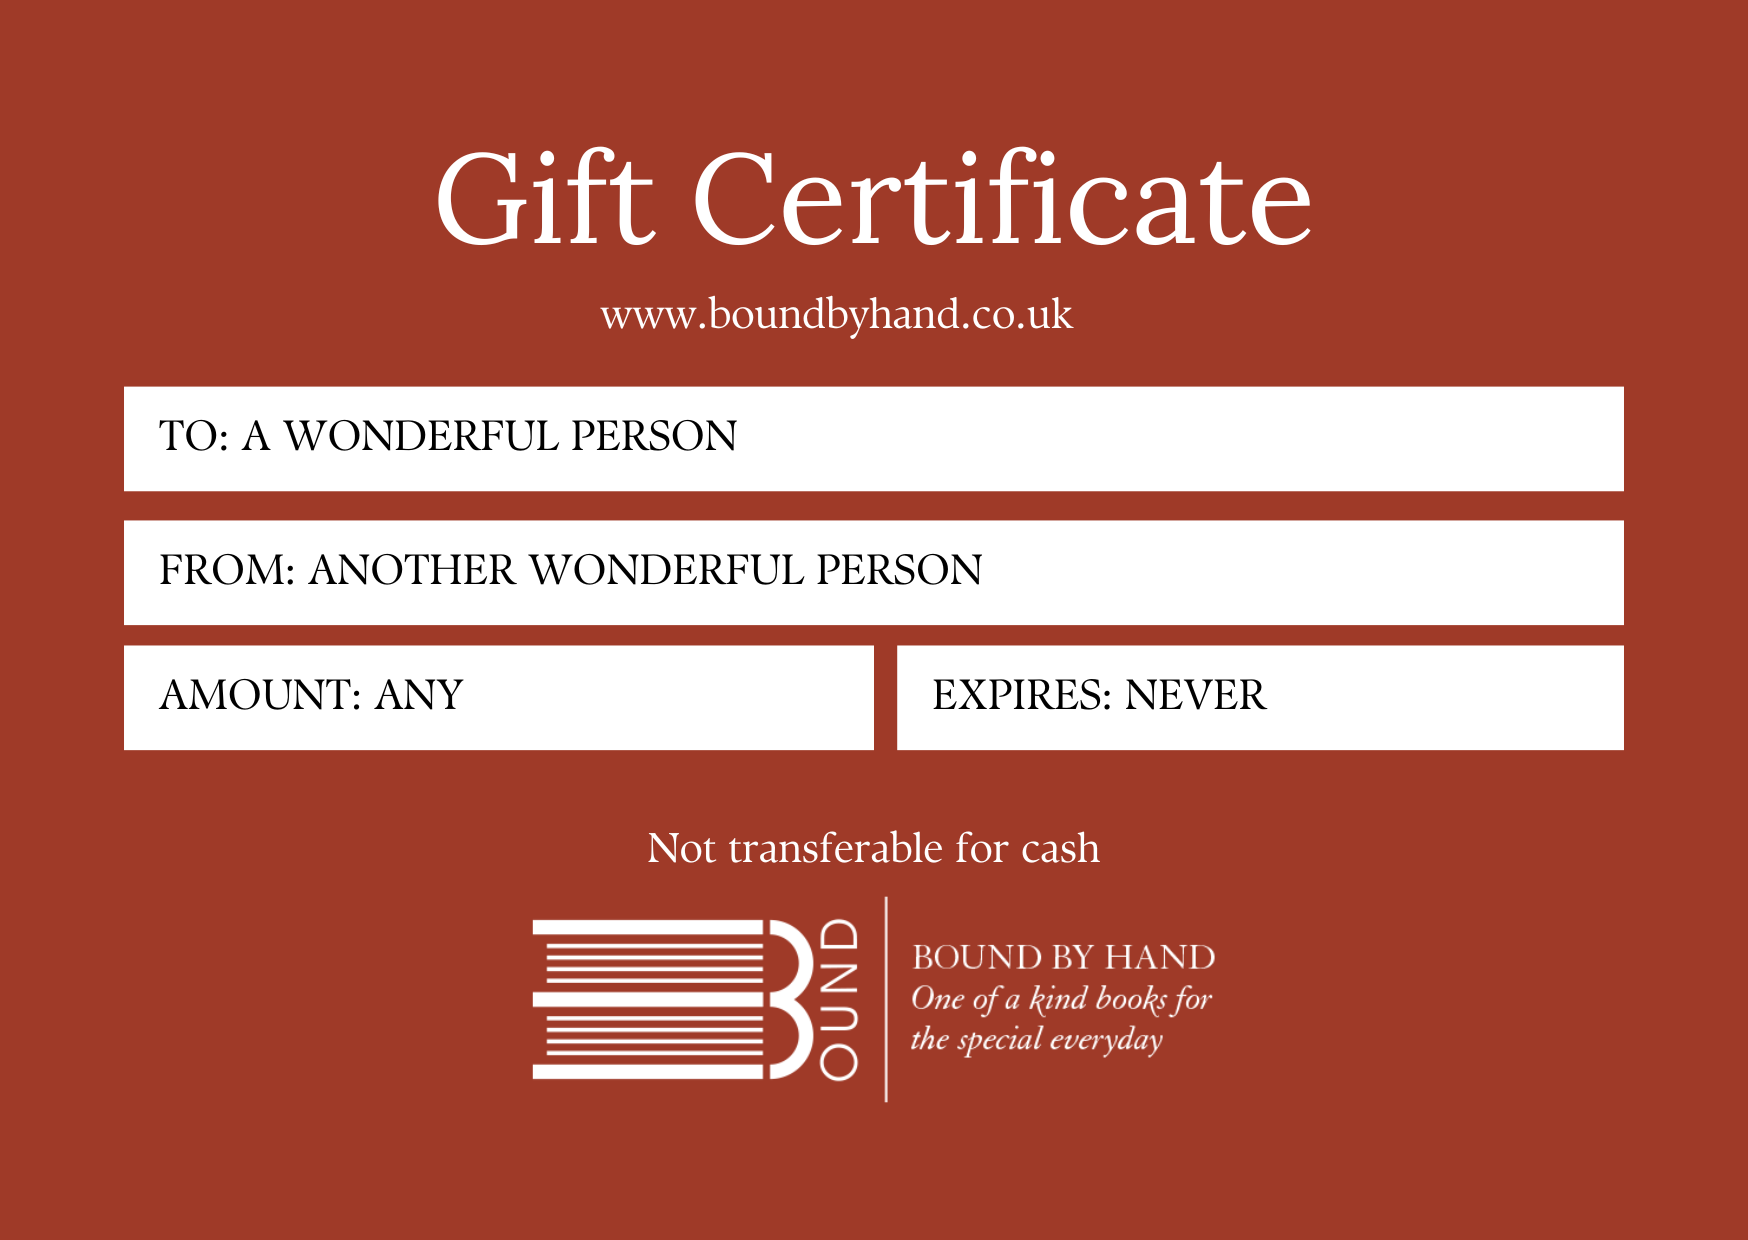 Gift certificate card for Bound by Hand leather journals, sketchbooks, wedding guest and memory books